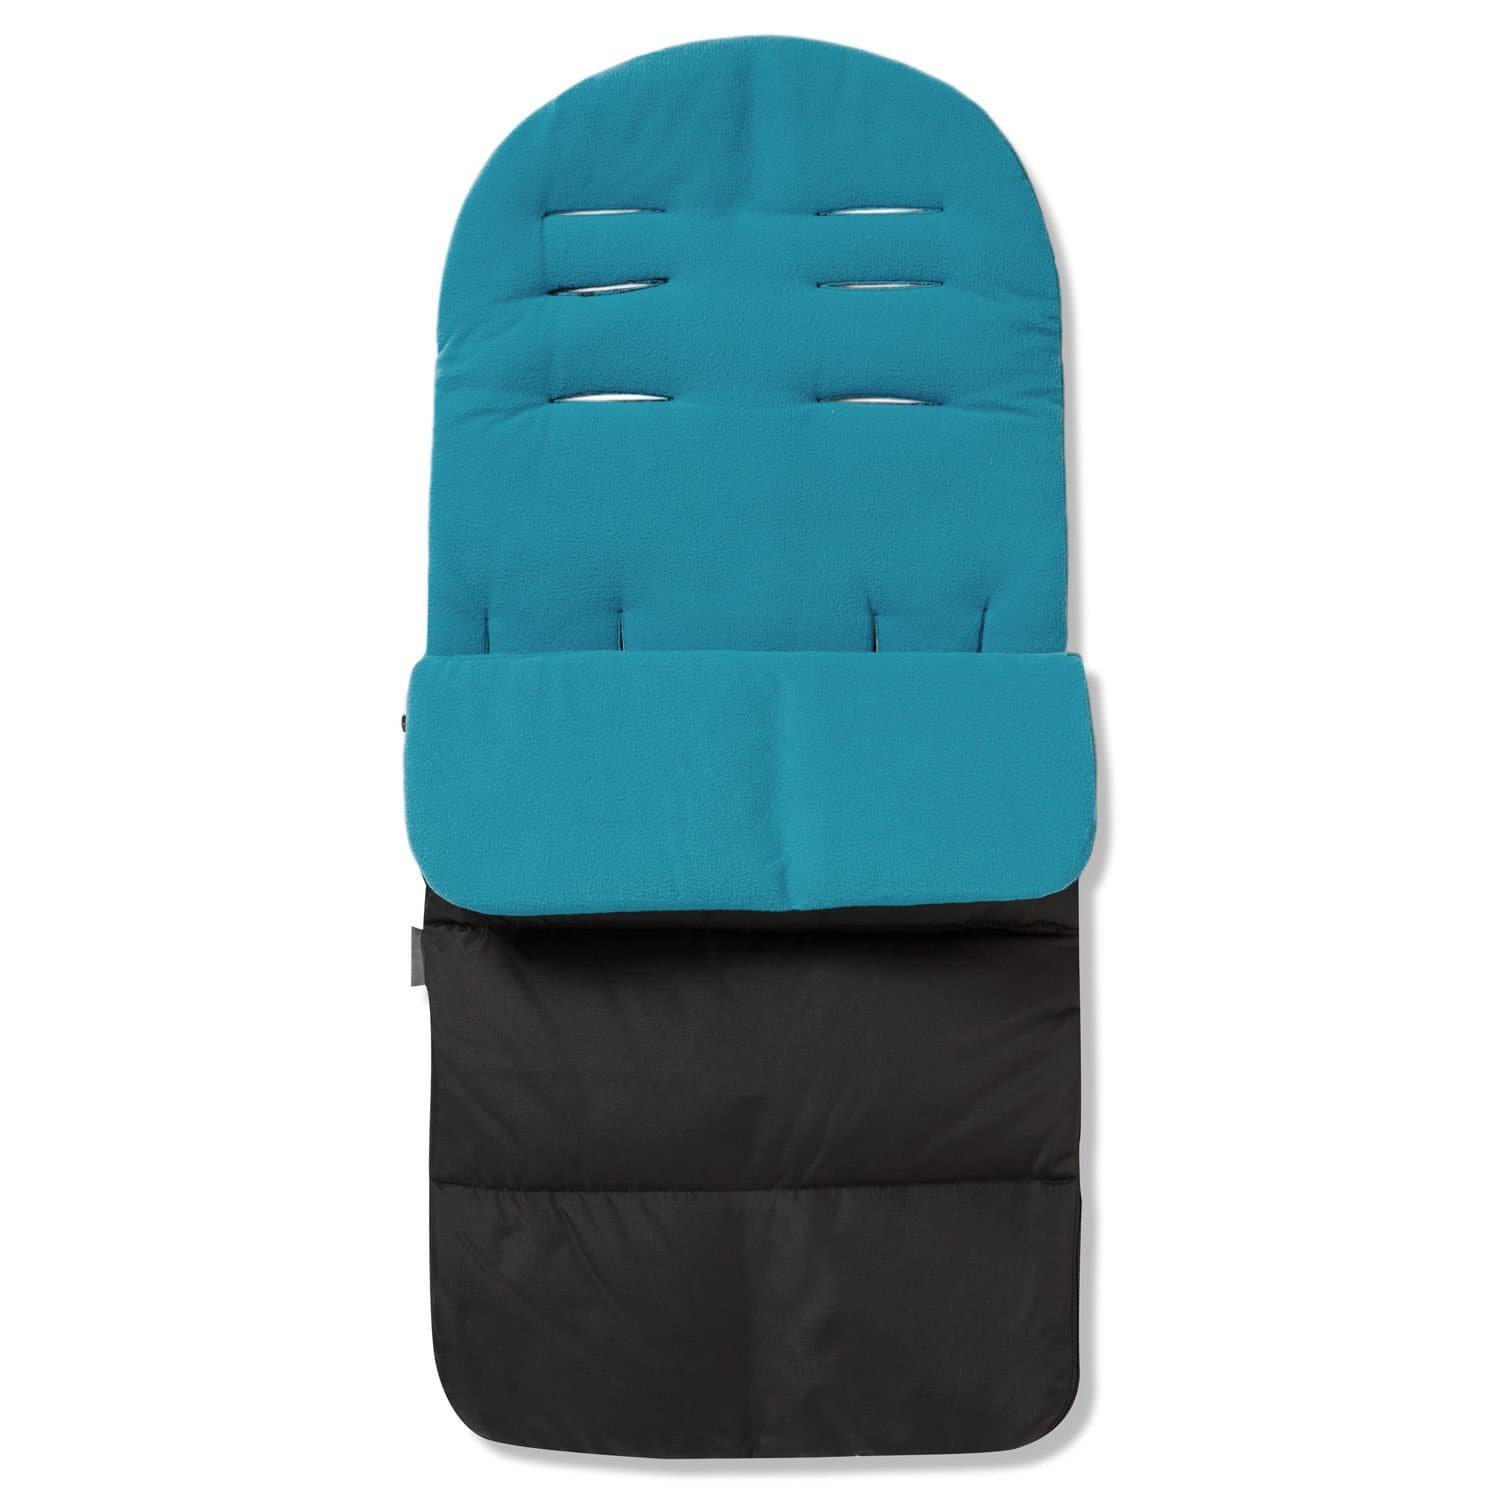 Premium Footmuff / Cosy Toes Compatible with XTS - Ocean Blue / Fits All Models | For Your Little One